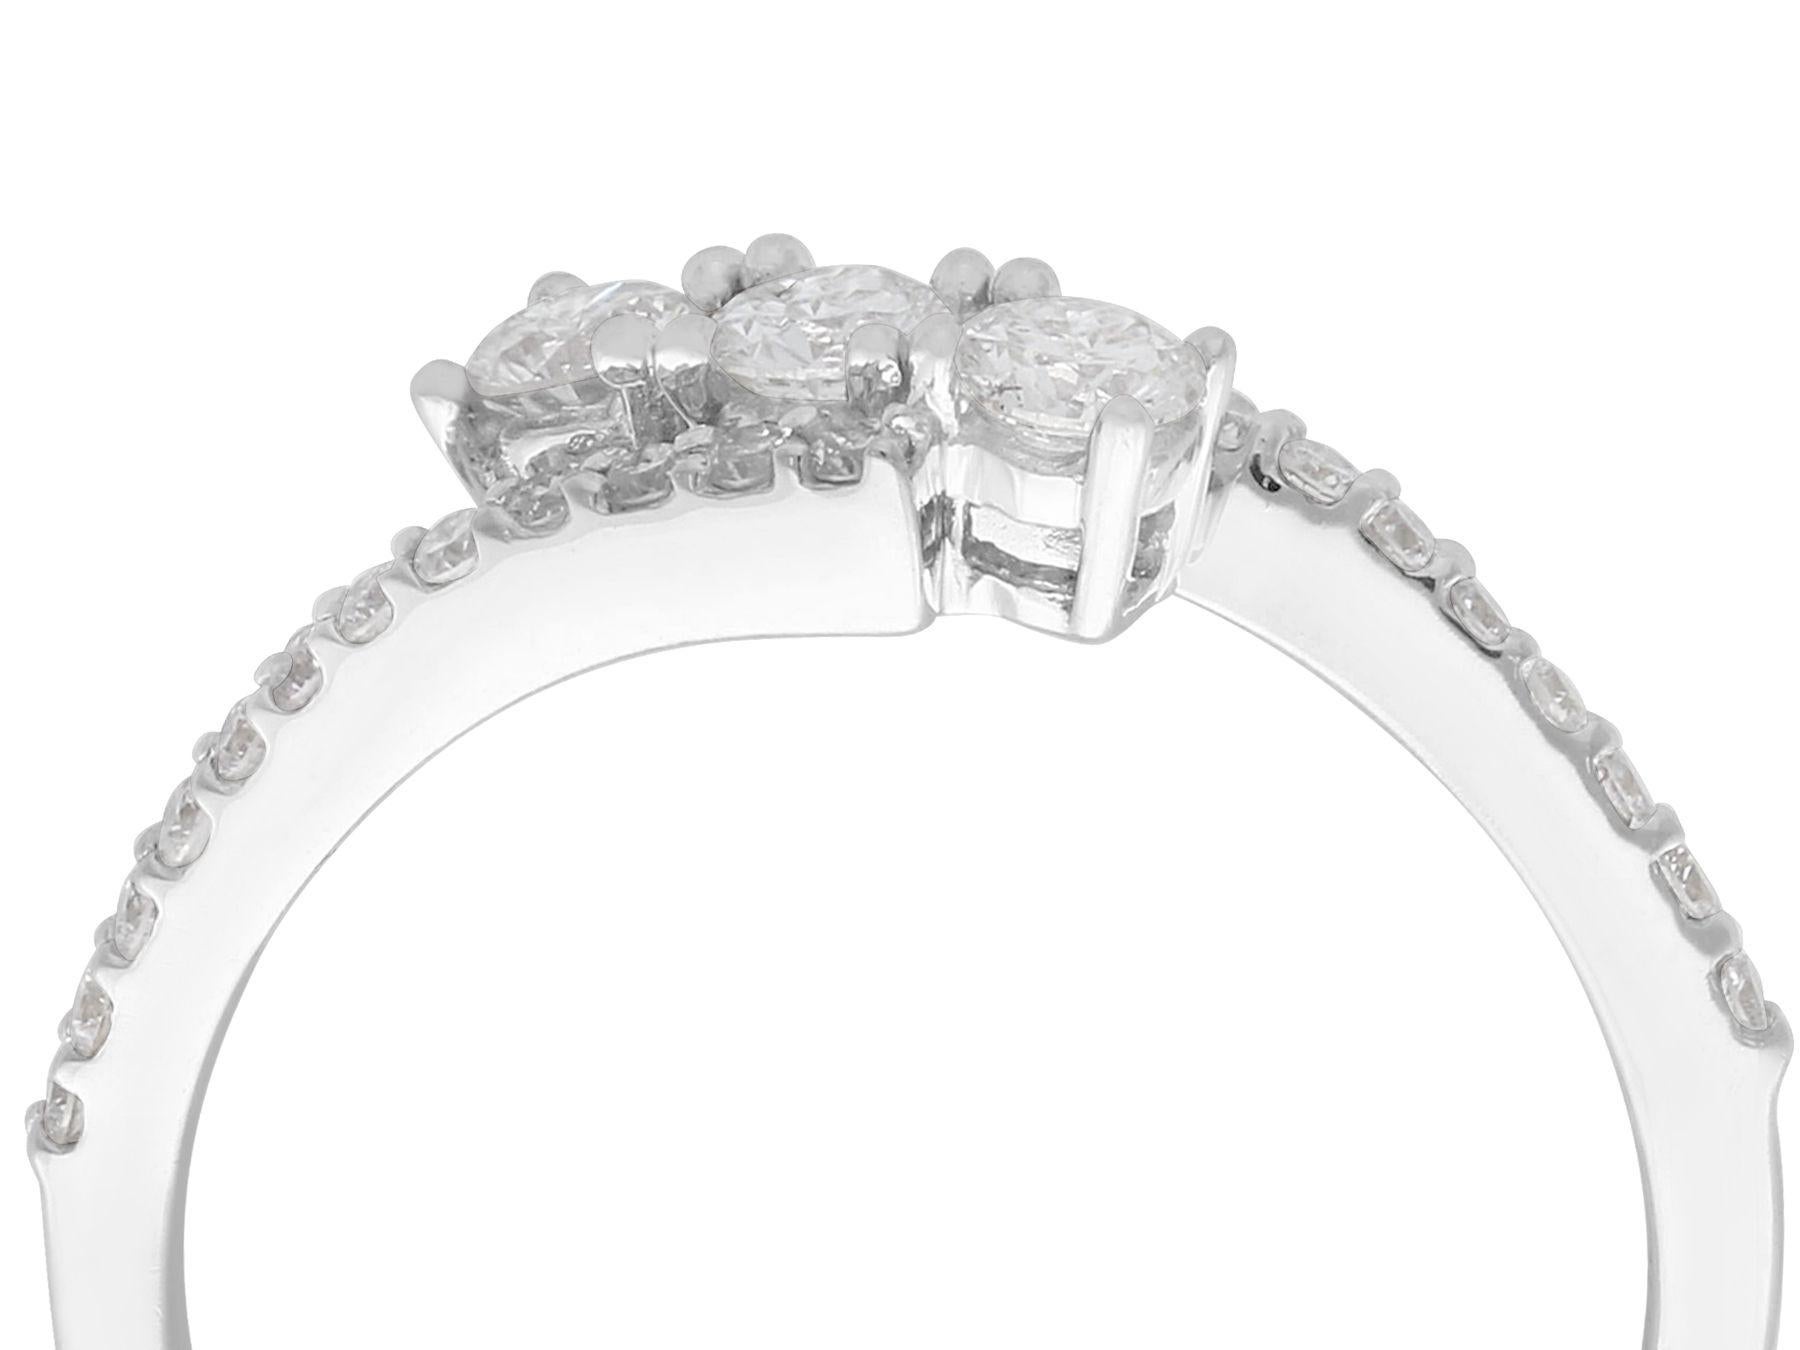 A fine and impressive 0.56 carat diamond and 18 karat white gold three stone twist ring; part of our diverse diamond jewelry and estate jewelry collections.

This fine and impressive diamond twist ring has been crafted in 18k white gold.

The twist